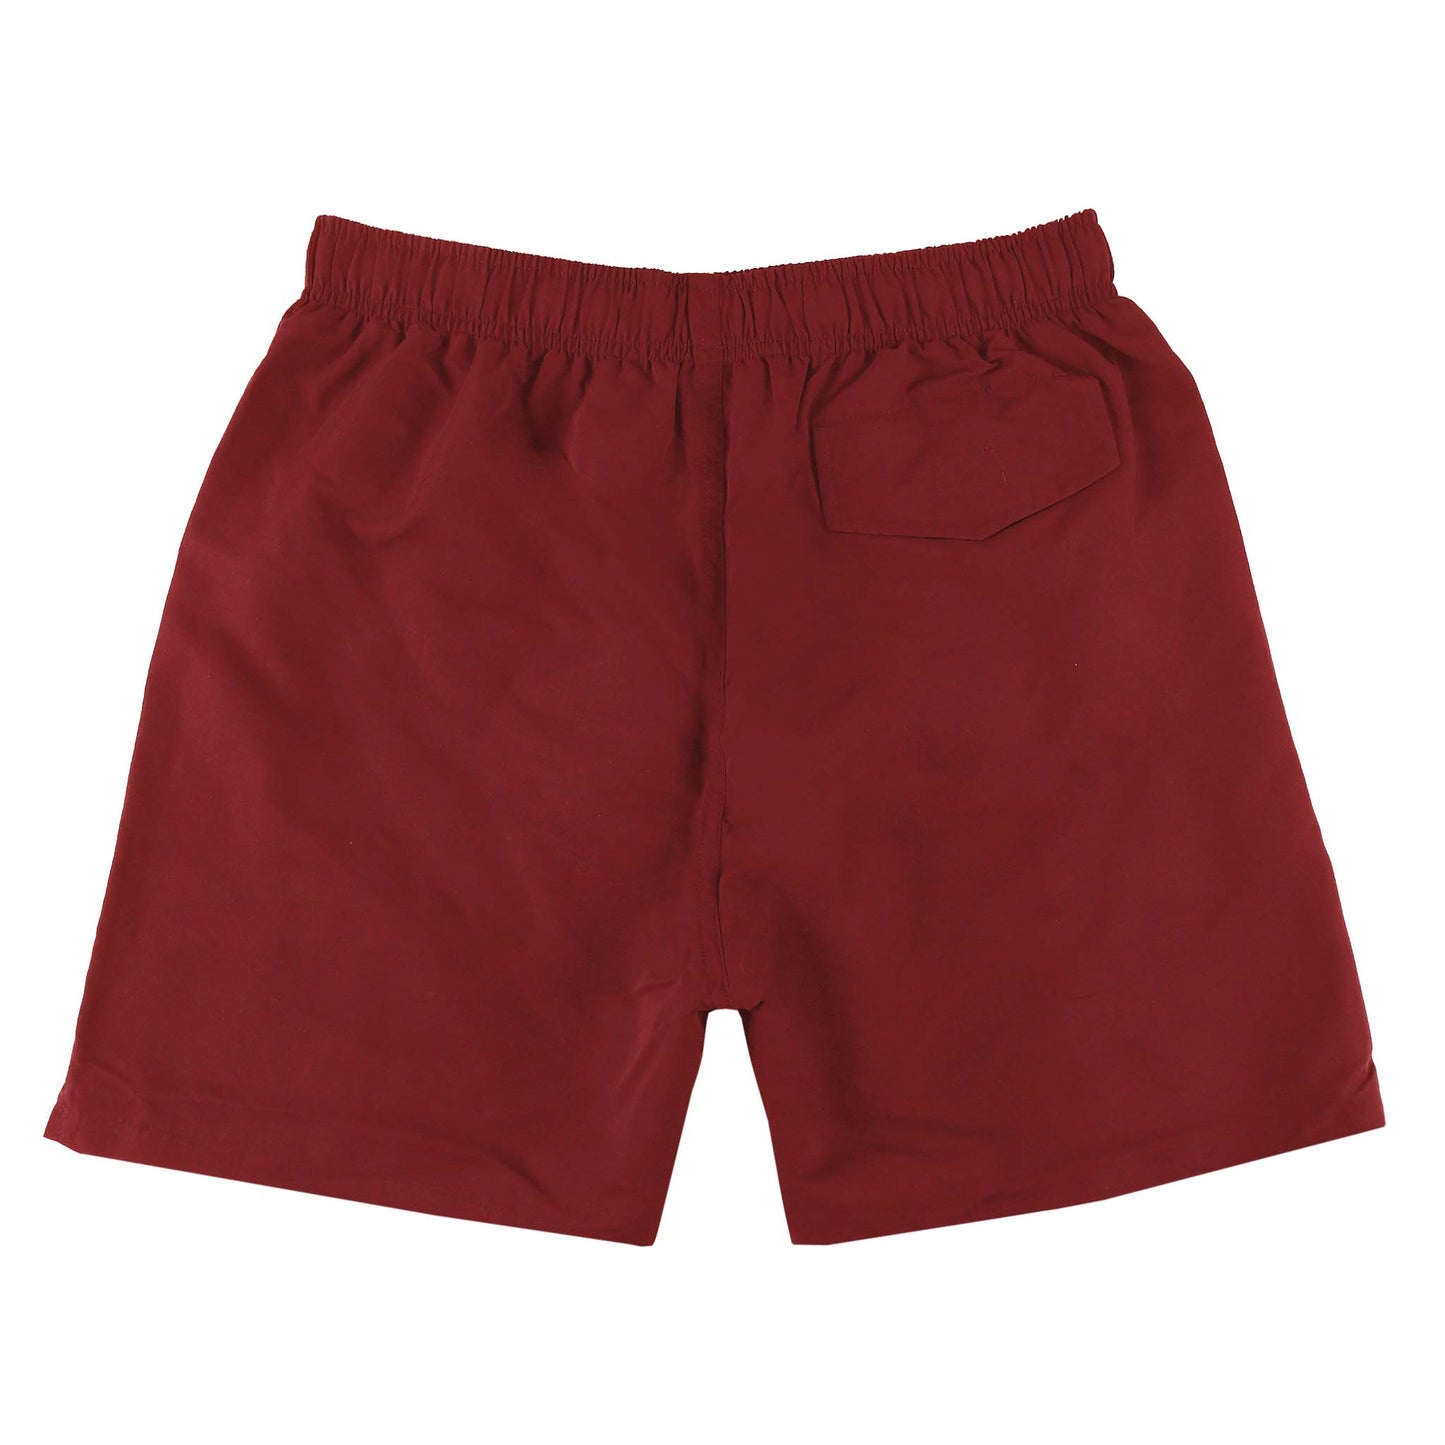 Red Boys Swimsuit Shorts